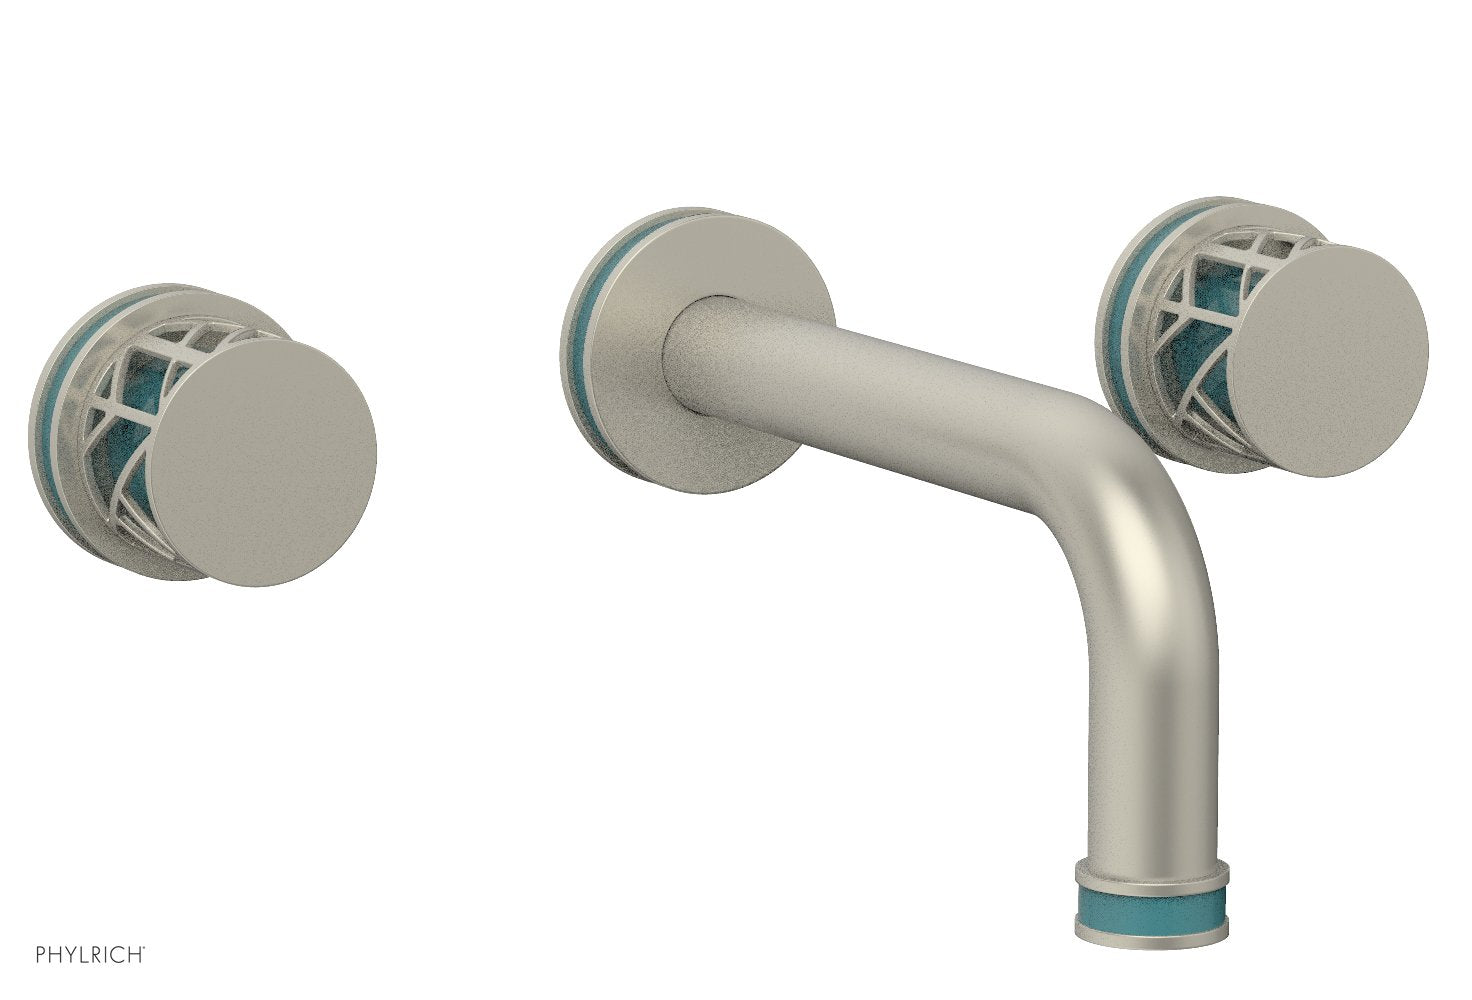 Phylrich JOLIE Wall Lavatory Set - Round Handles with "Turquoise" Accents